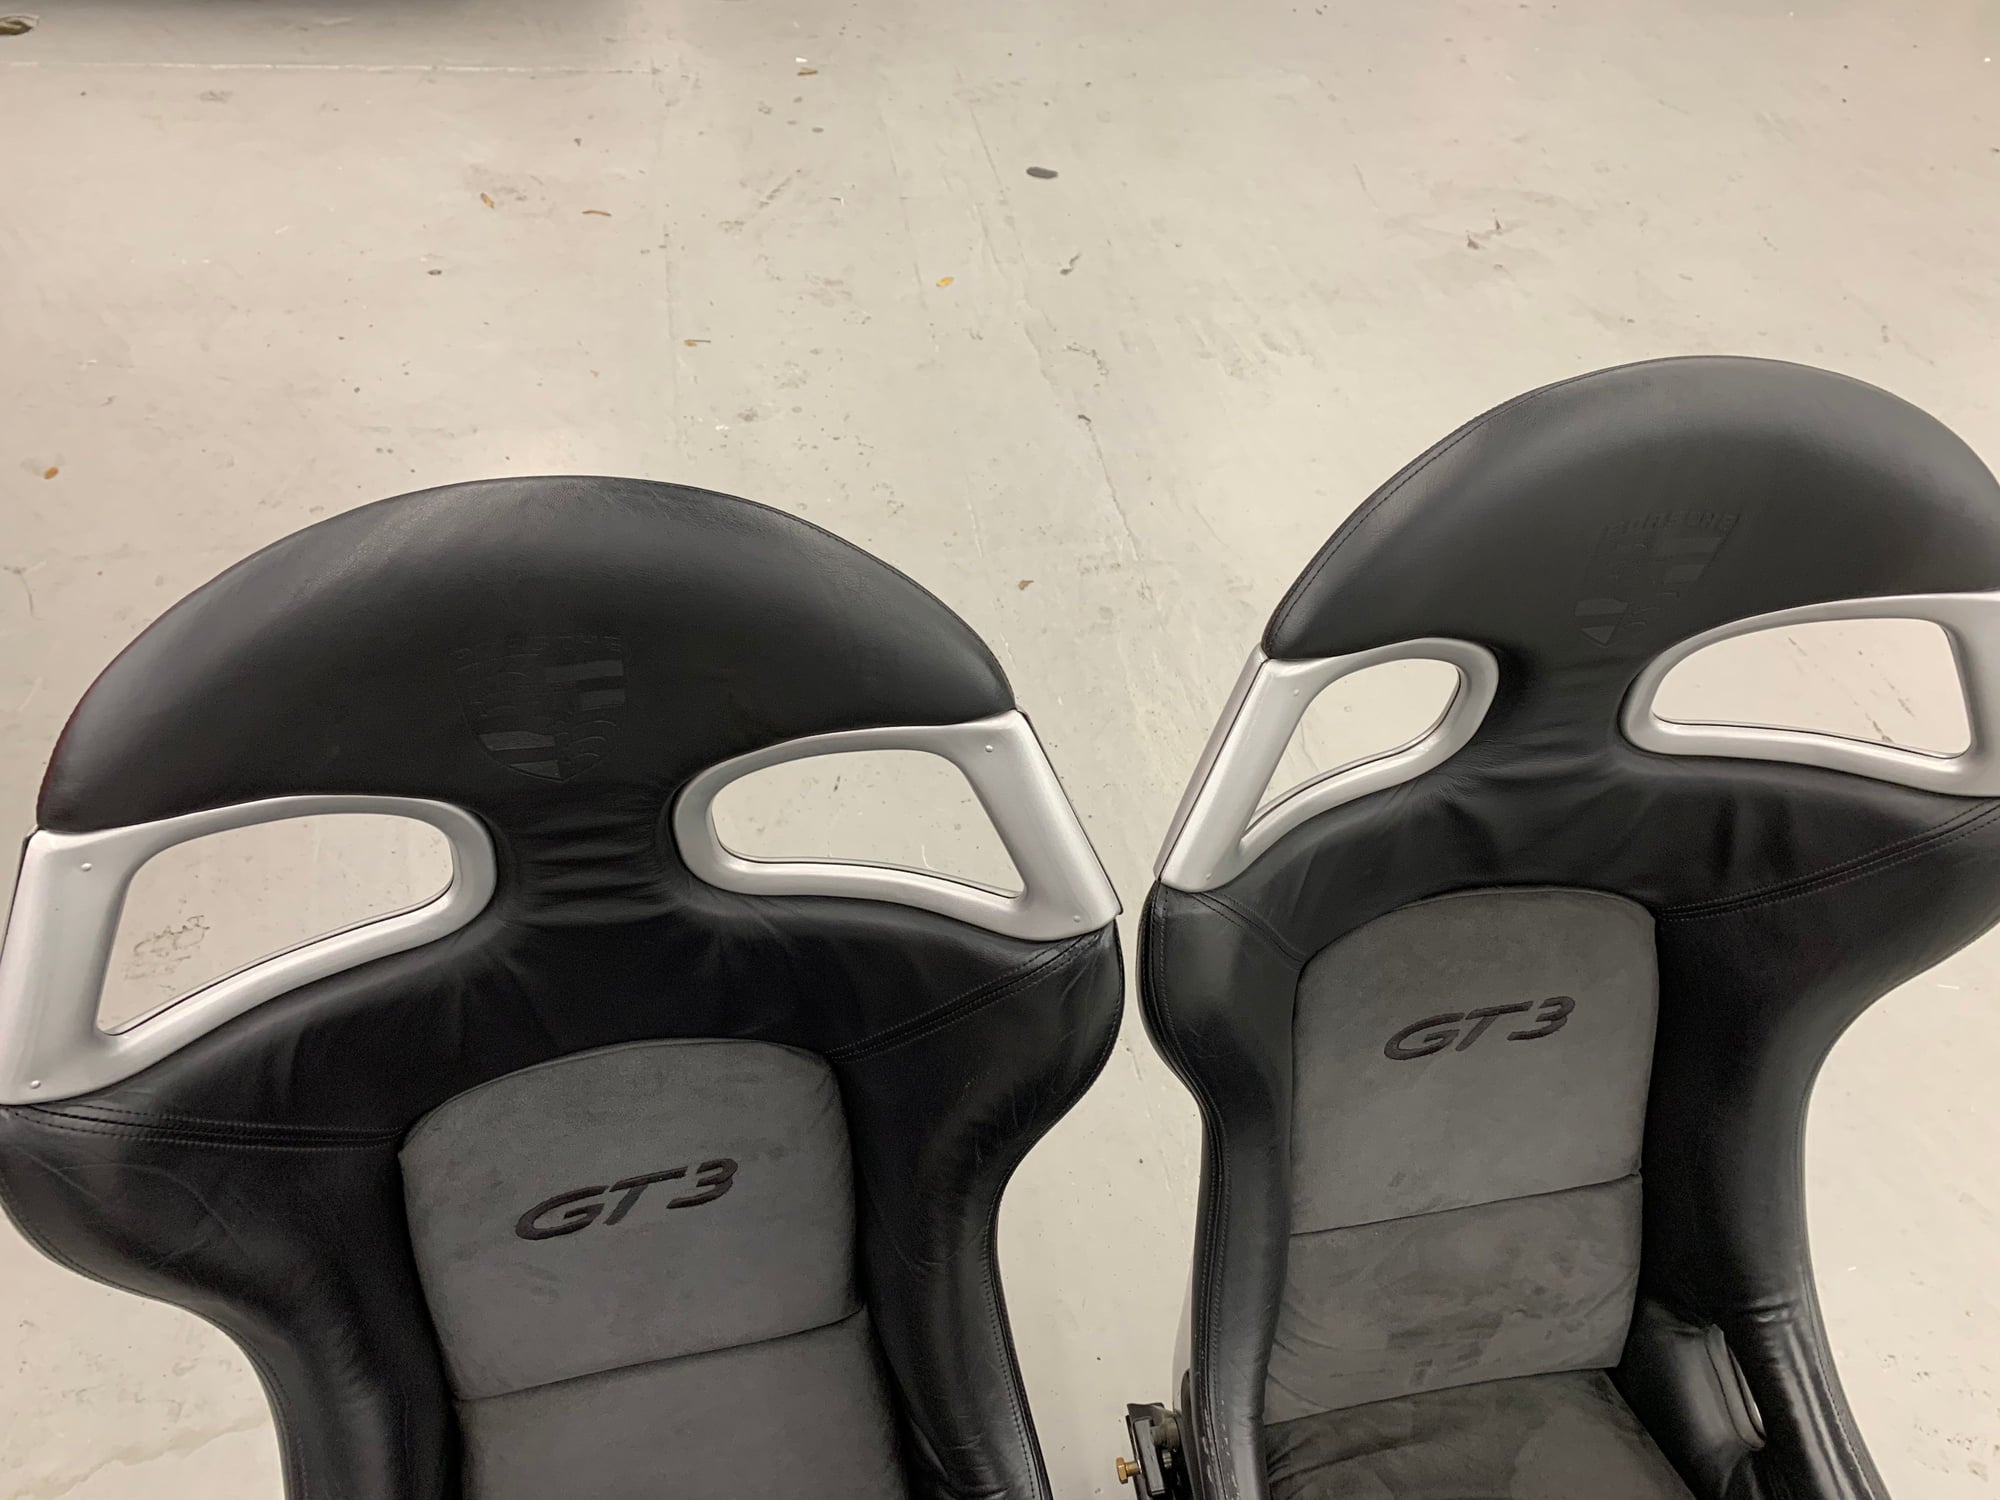 Interior/Upholstery - 996 gt3 club sports bucket seats - Used - 0  All Models - Los Angeles, CA 90024, United States